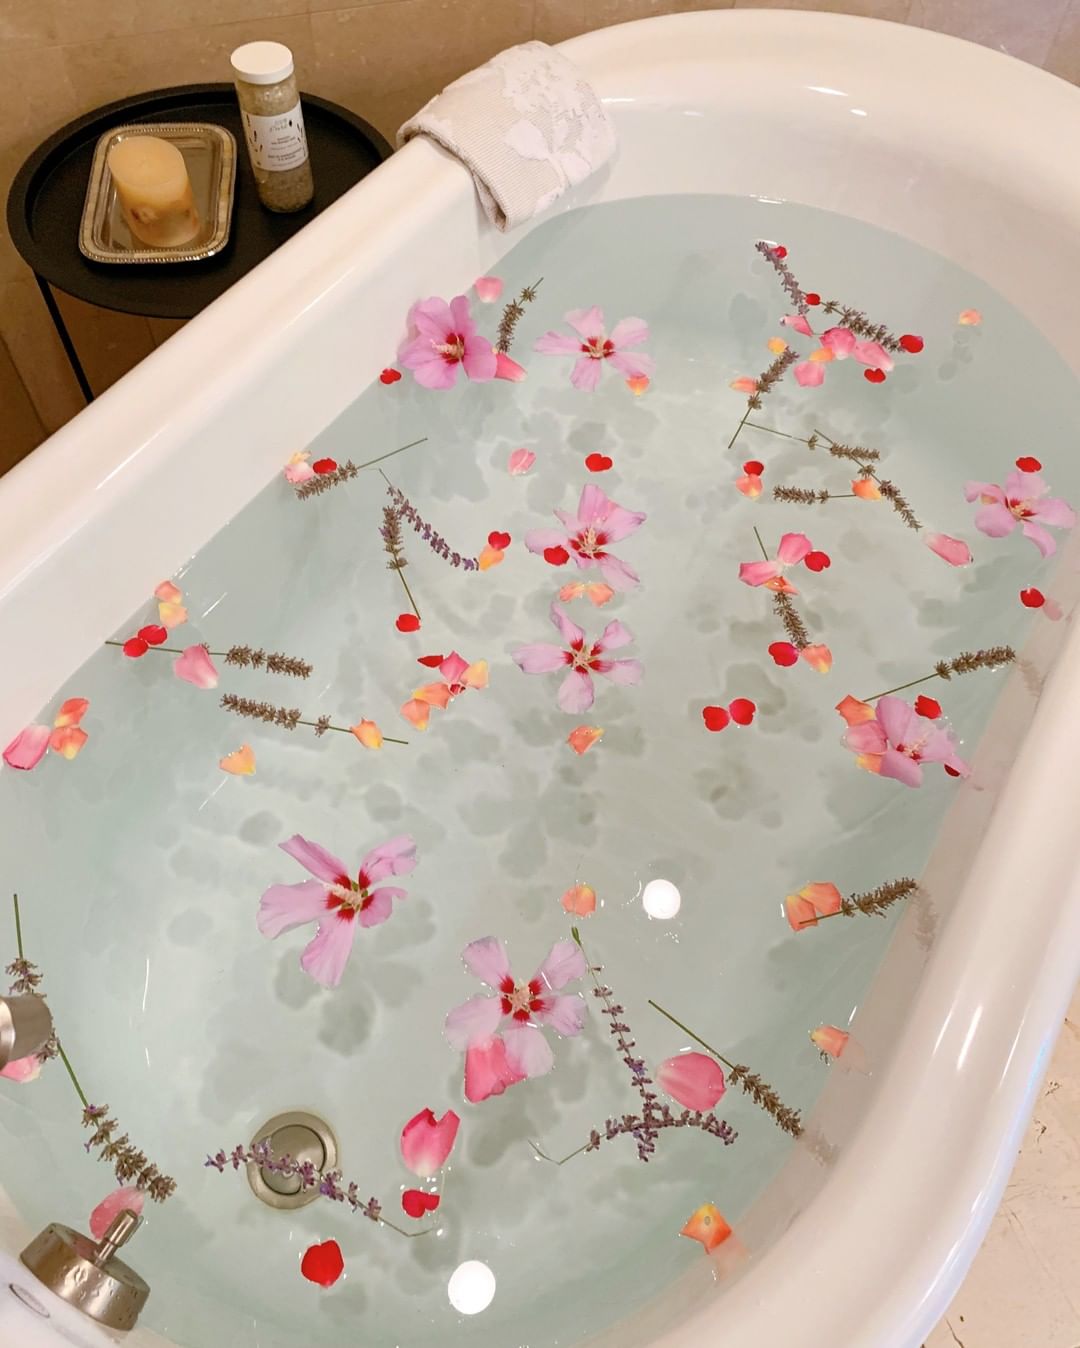 100% PURE - Relaxation station 💧🌿🌸⠀⠀⠀⠀⠀⠀⠀⠀⠀
BRB, we'll be dipping into this floral dream bath for #NationalRelaxationDay with our favorite 100% PURE Bath Salts! What's your favorite scent: Lavender, E...